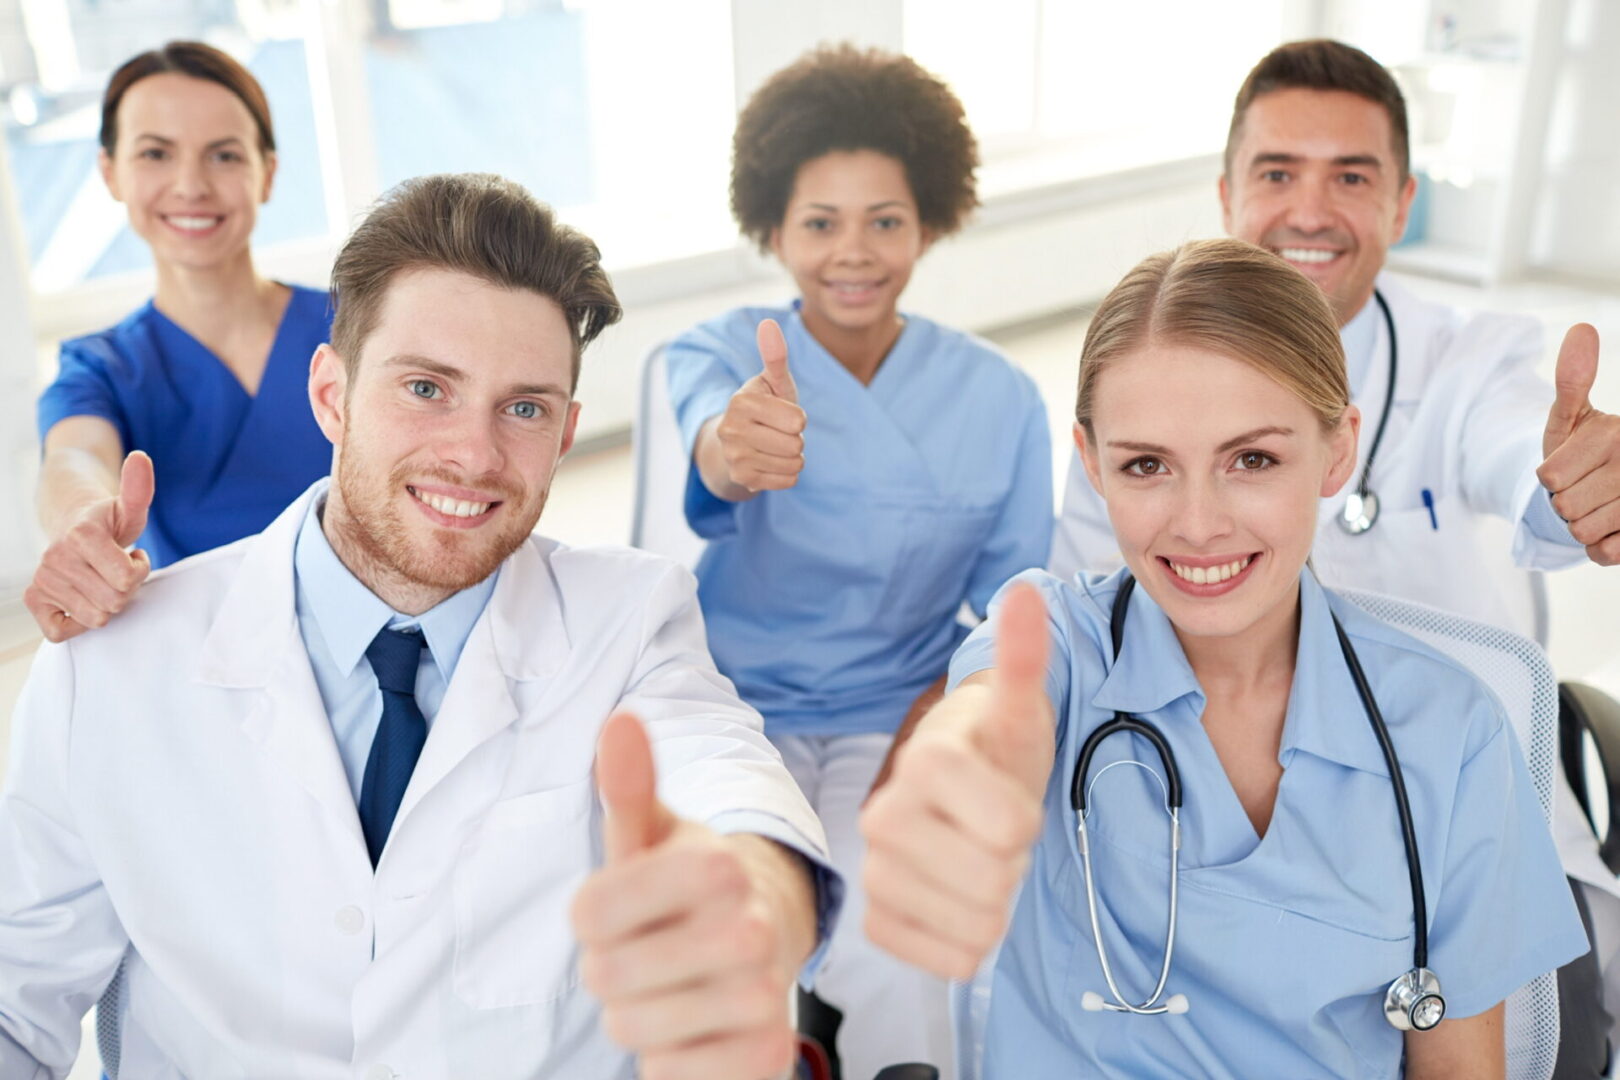 A group of doctors giving thumbs up in an office.